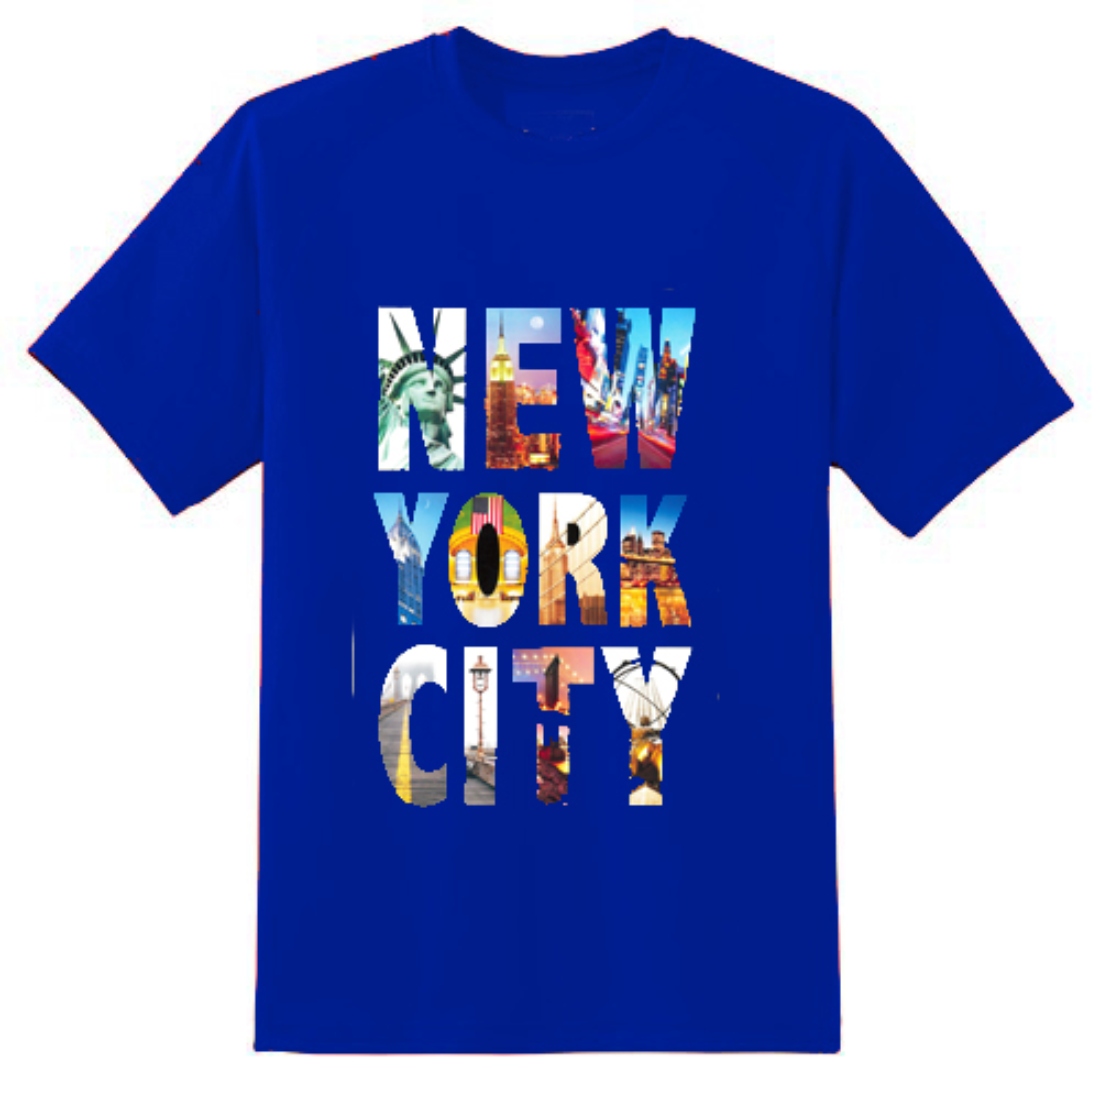 NYC T SHIRT'S DESINGS IN 7 DIFFERENT COLORS cover image.